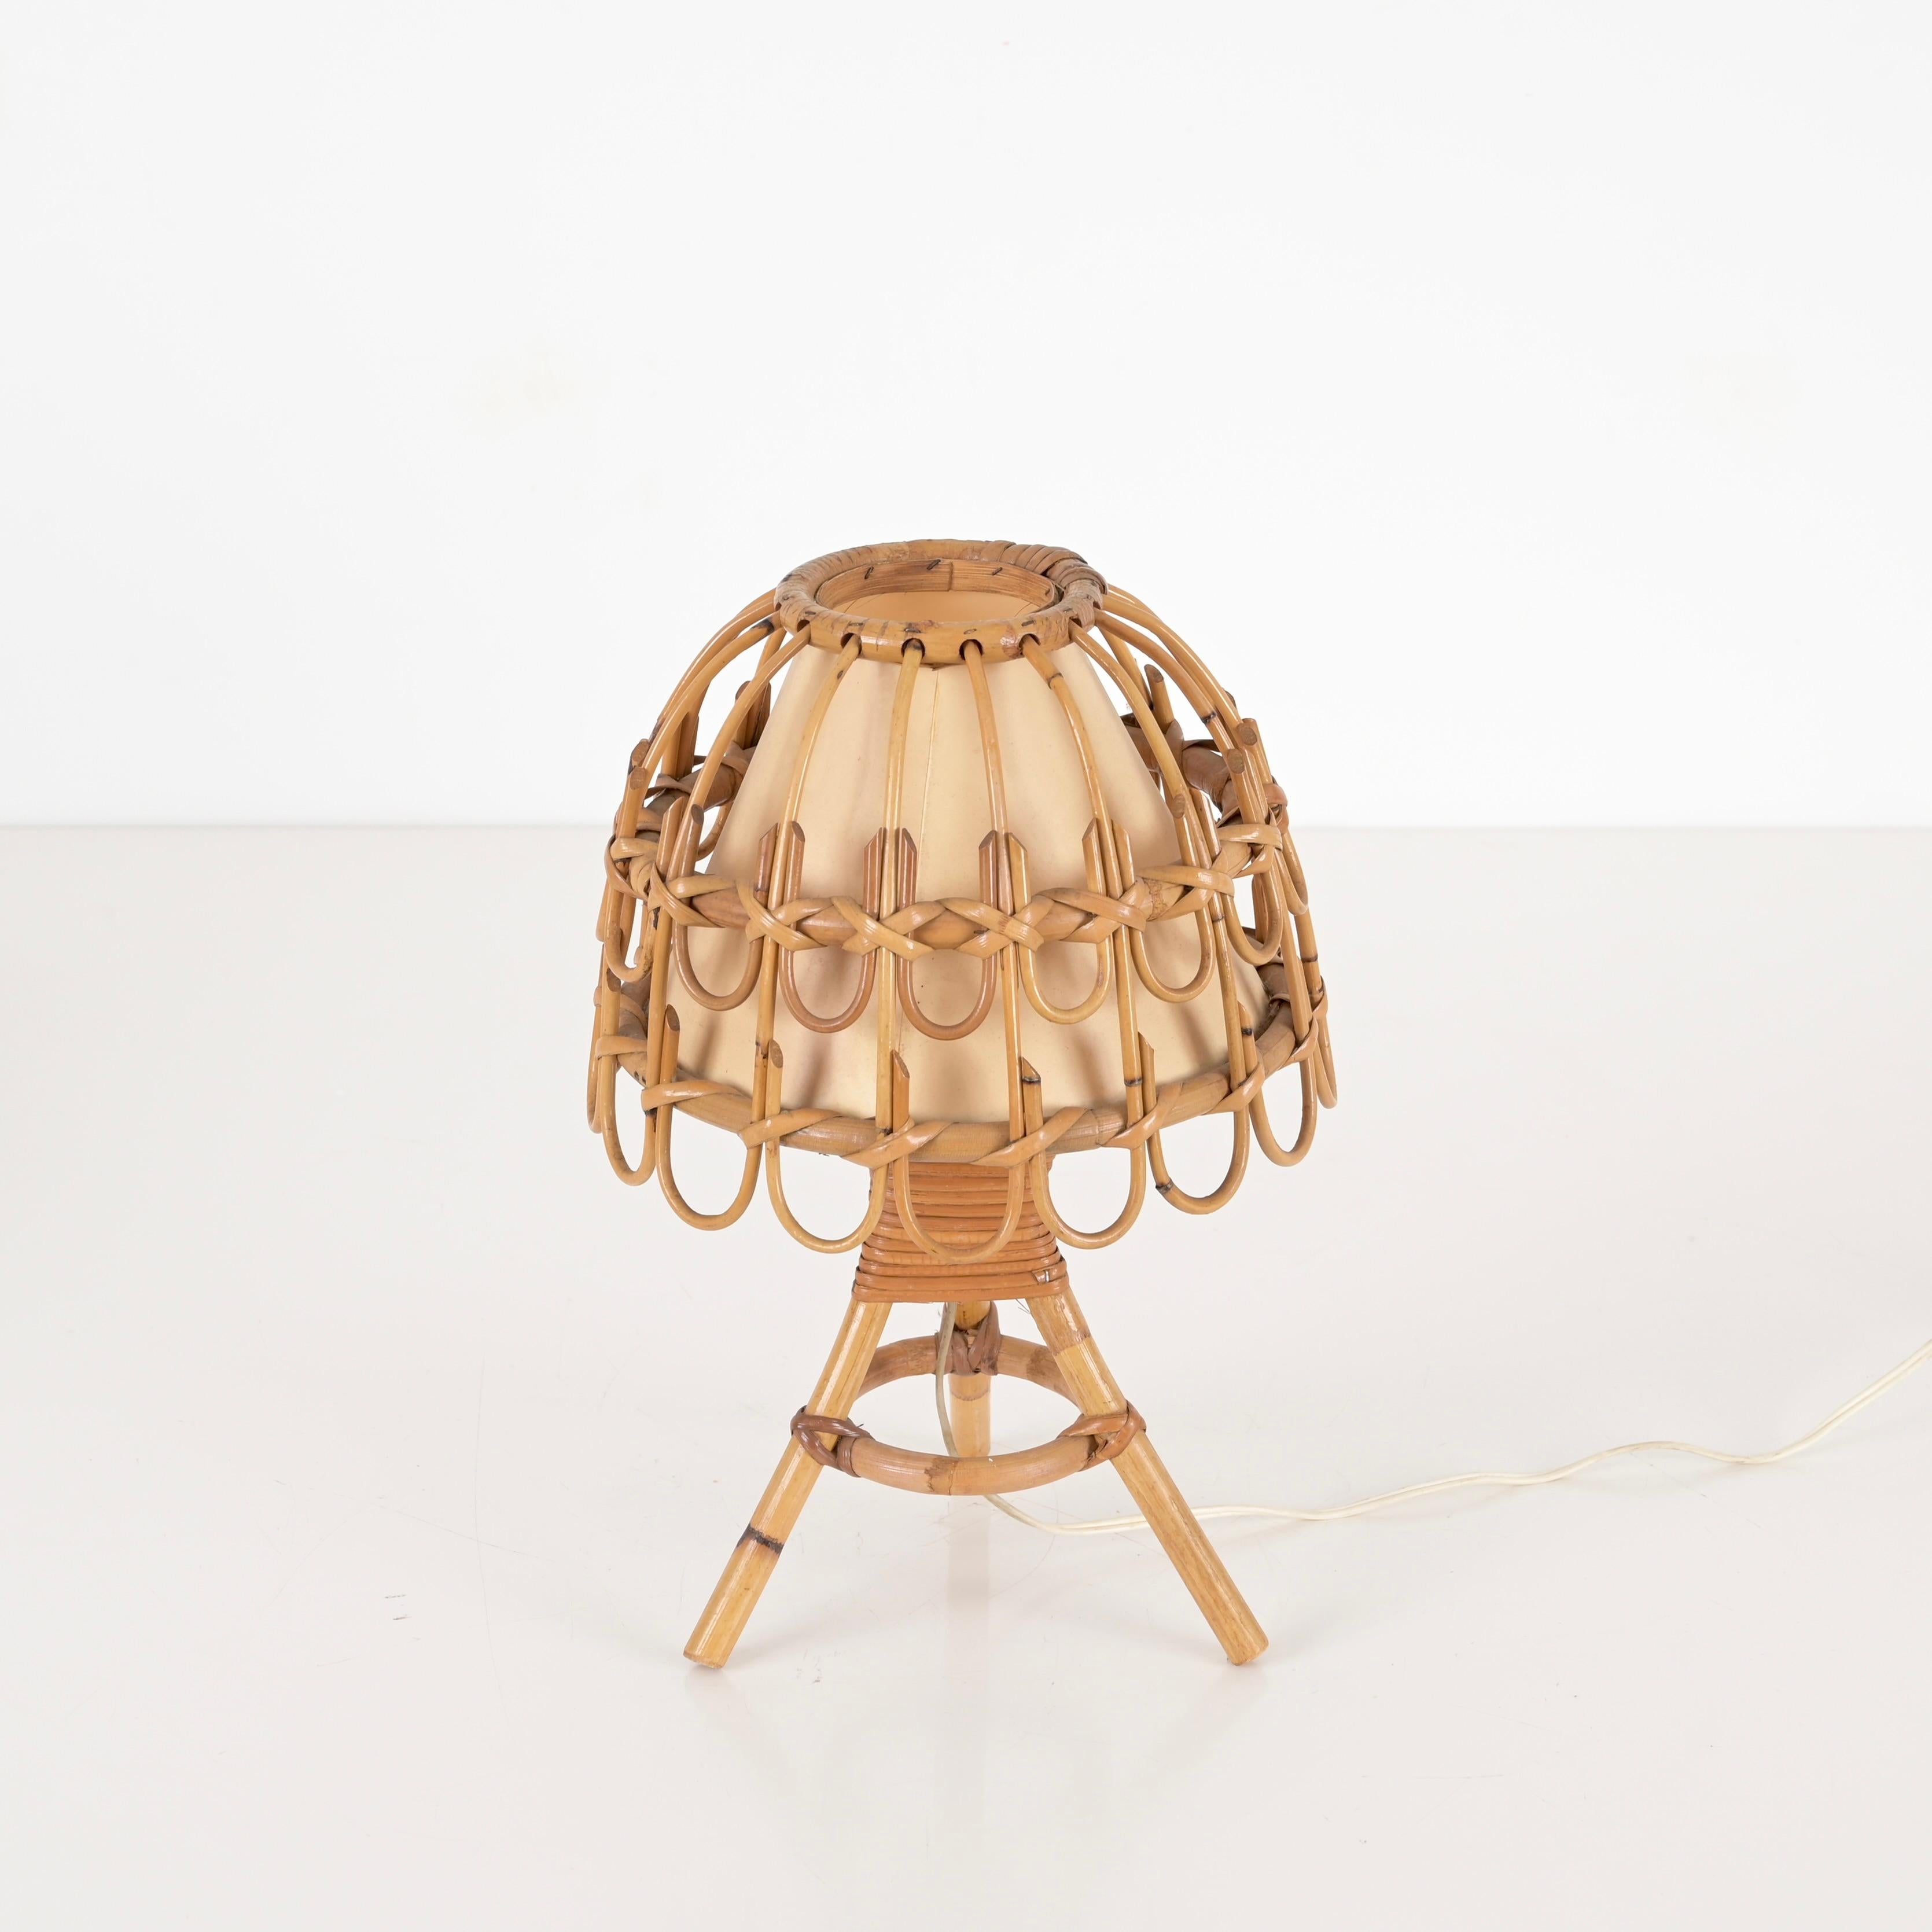 French Pair of Midcentury Table Lamps in Rattan and Wicker, Louis Sognot, France, 1960s